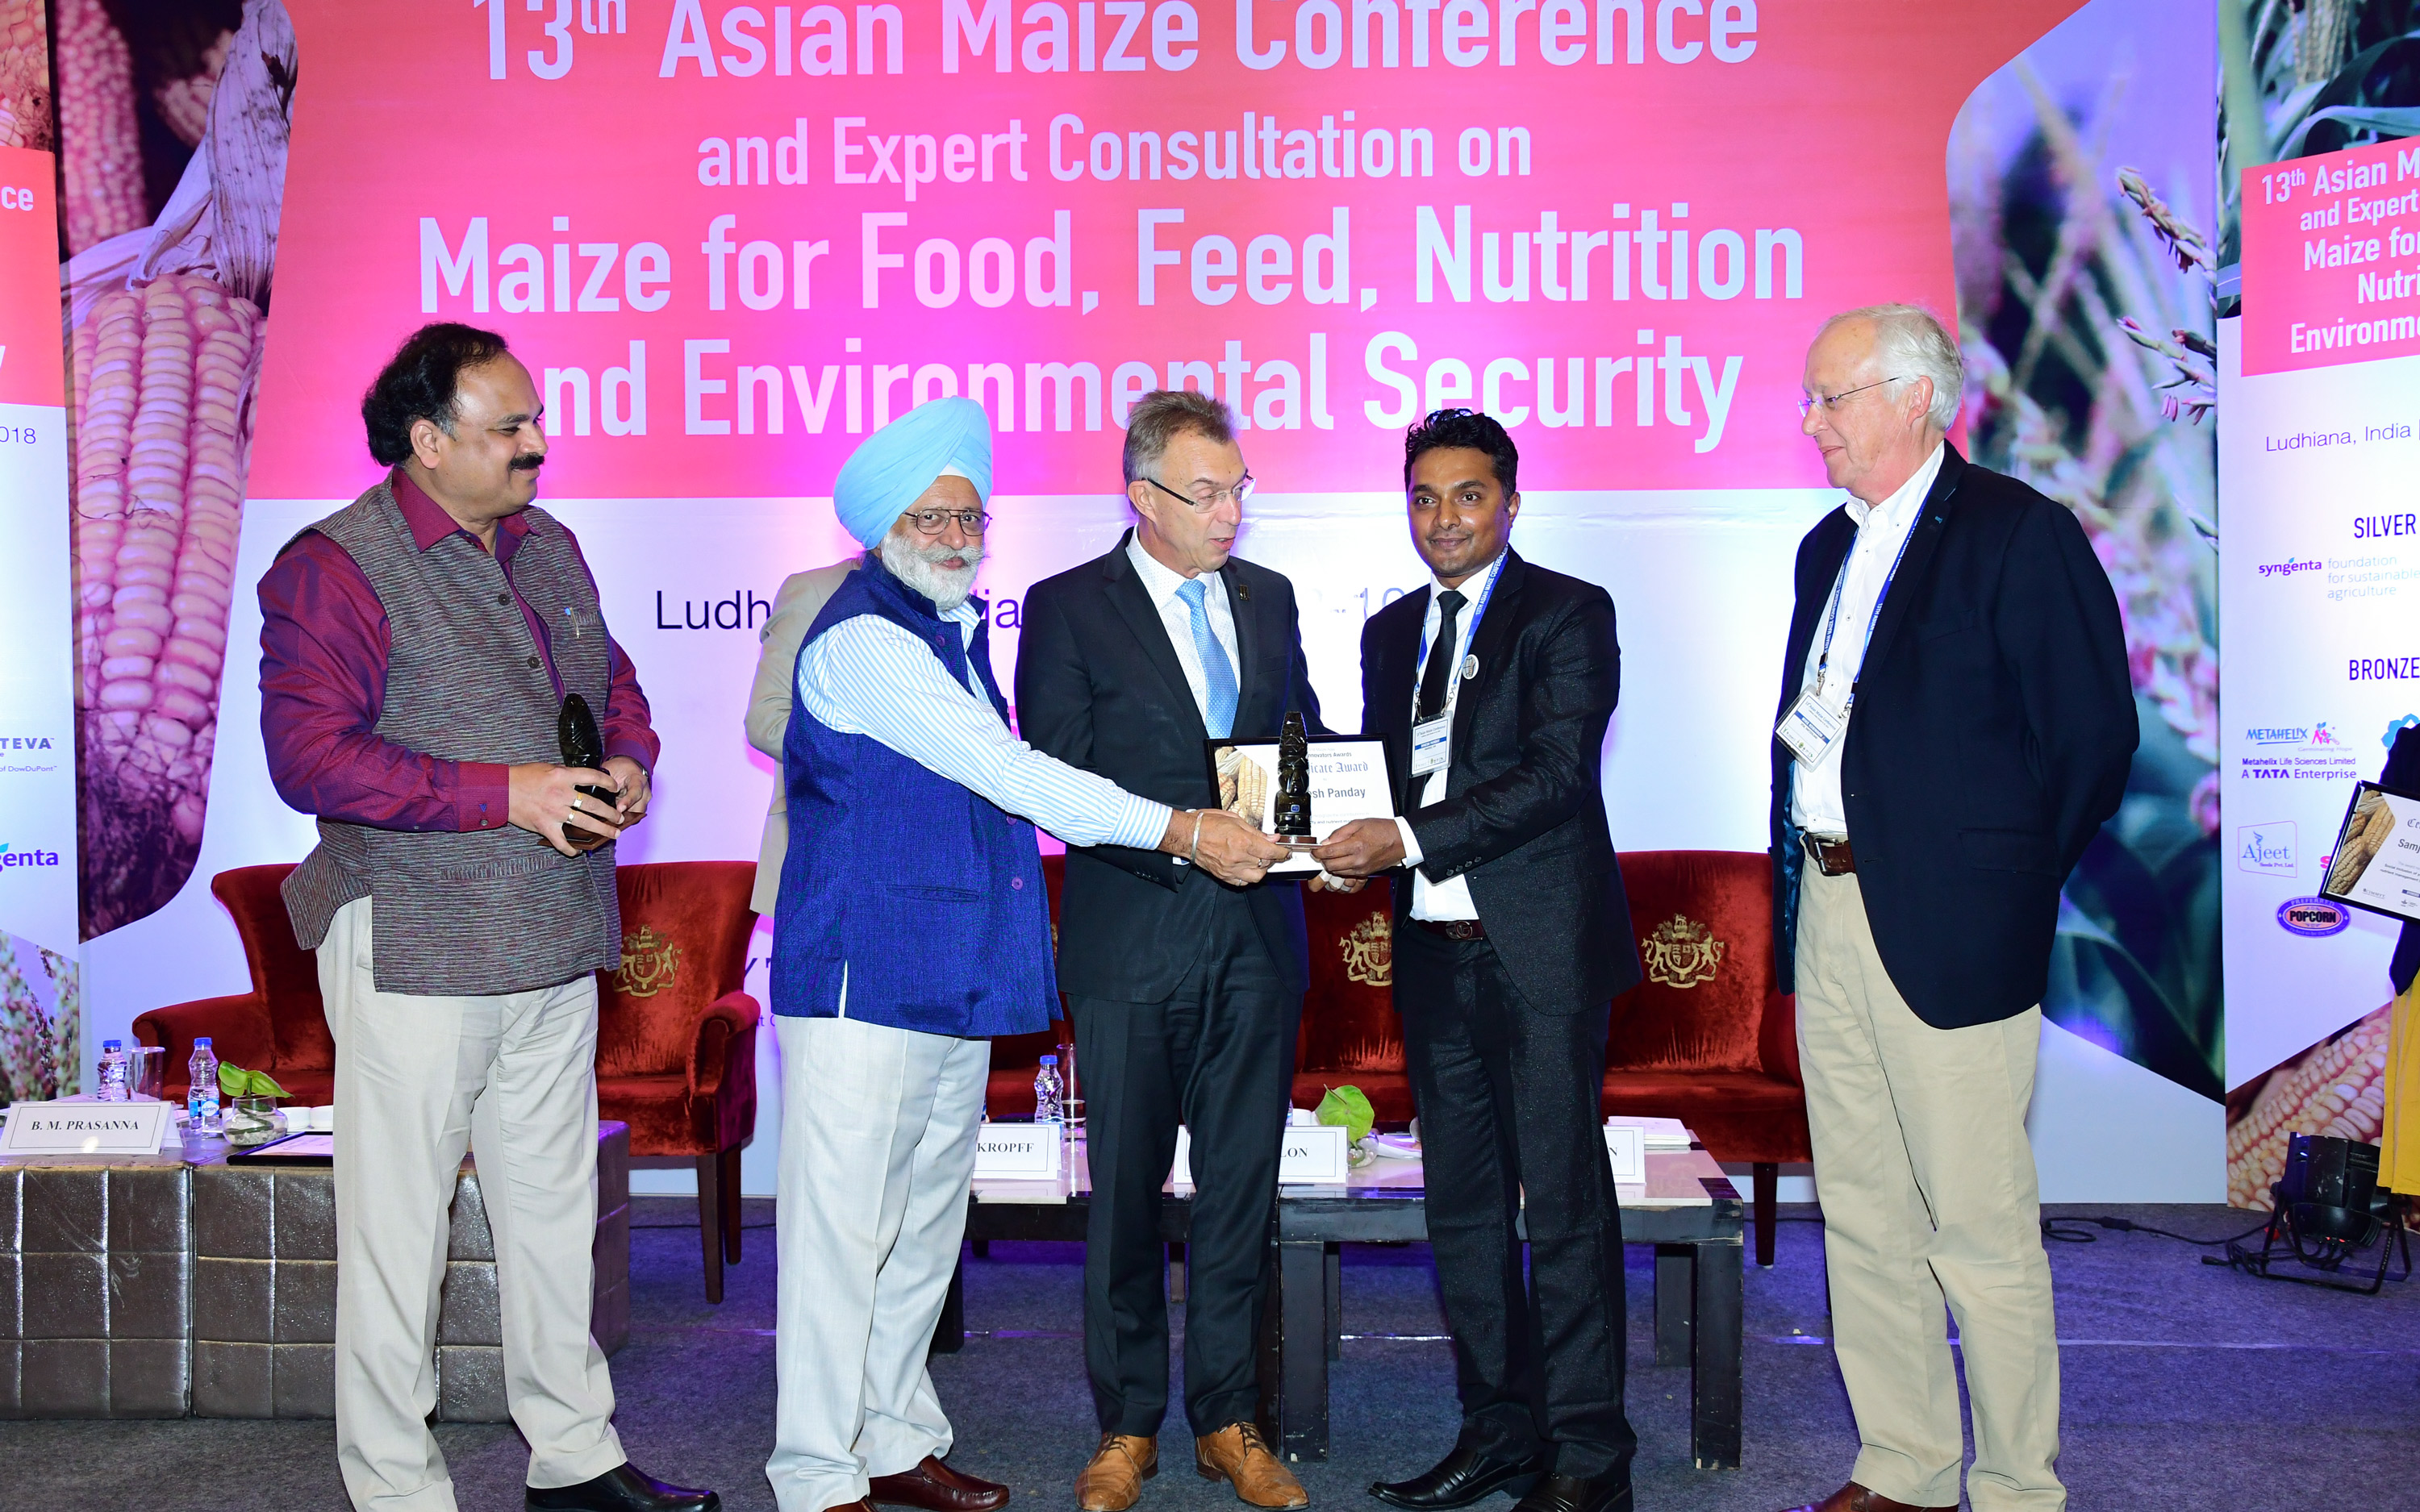 B. M. Prasanna, Director, CGIAR MAIZE (from left); B.S. Dhllon, Vice‐Chancellor, Punjab Agricultural University; Martin Kropff, Director General, CIMMYT; Dinesh Panday; Mike Robinson, SFSA, Switzerland & MAIZE‐ISC. Photo by Manjit Singh.